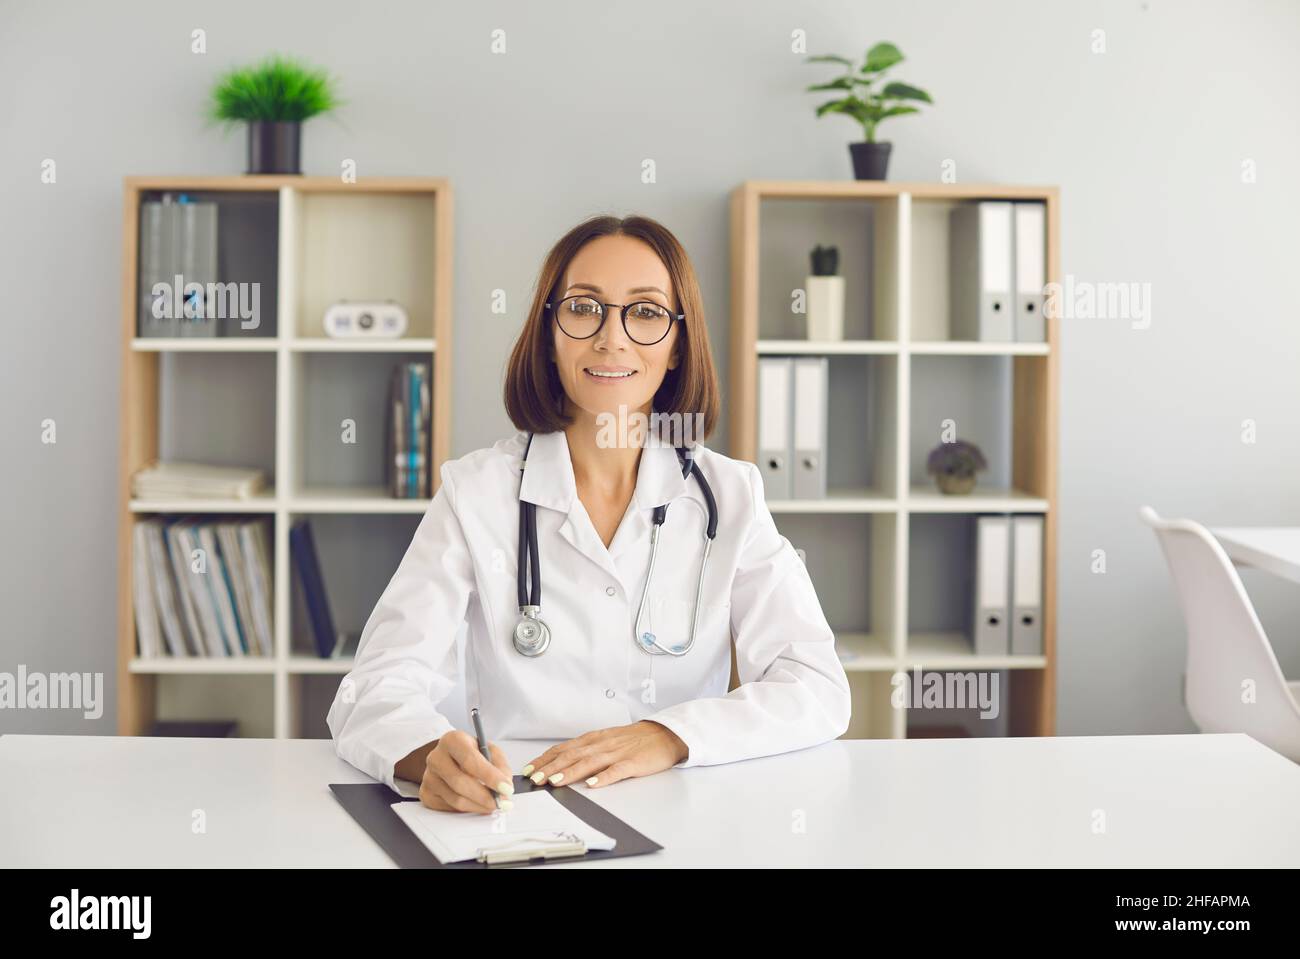 Doctor taking notes during video conference with colleagues or listening to online medical training. Stock Photo